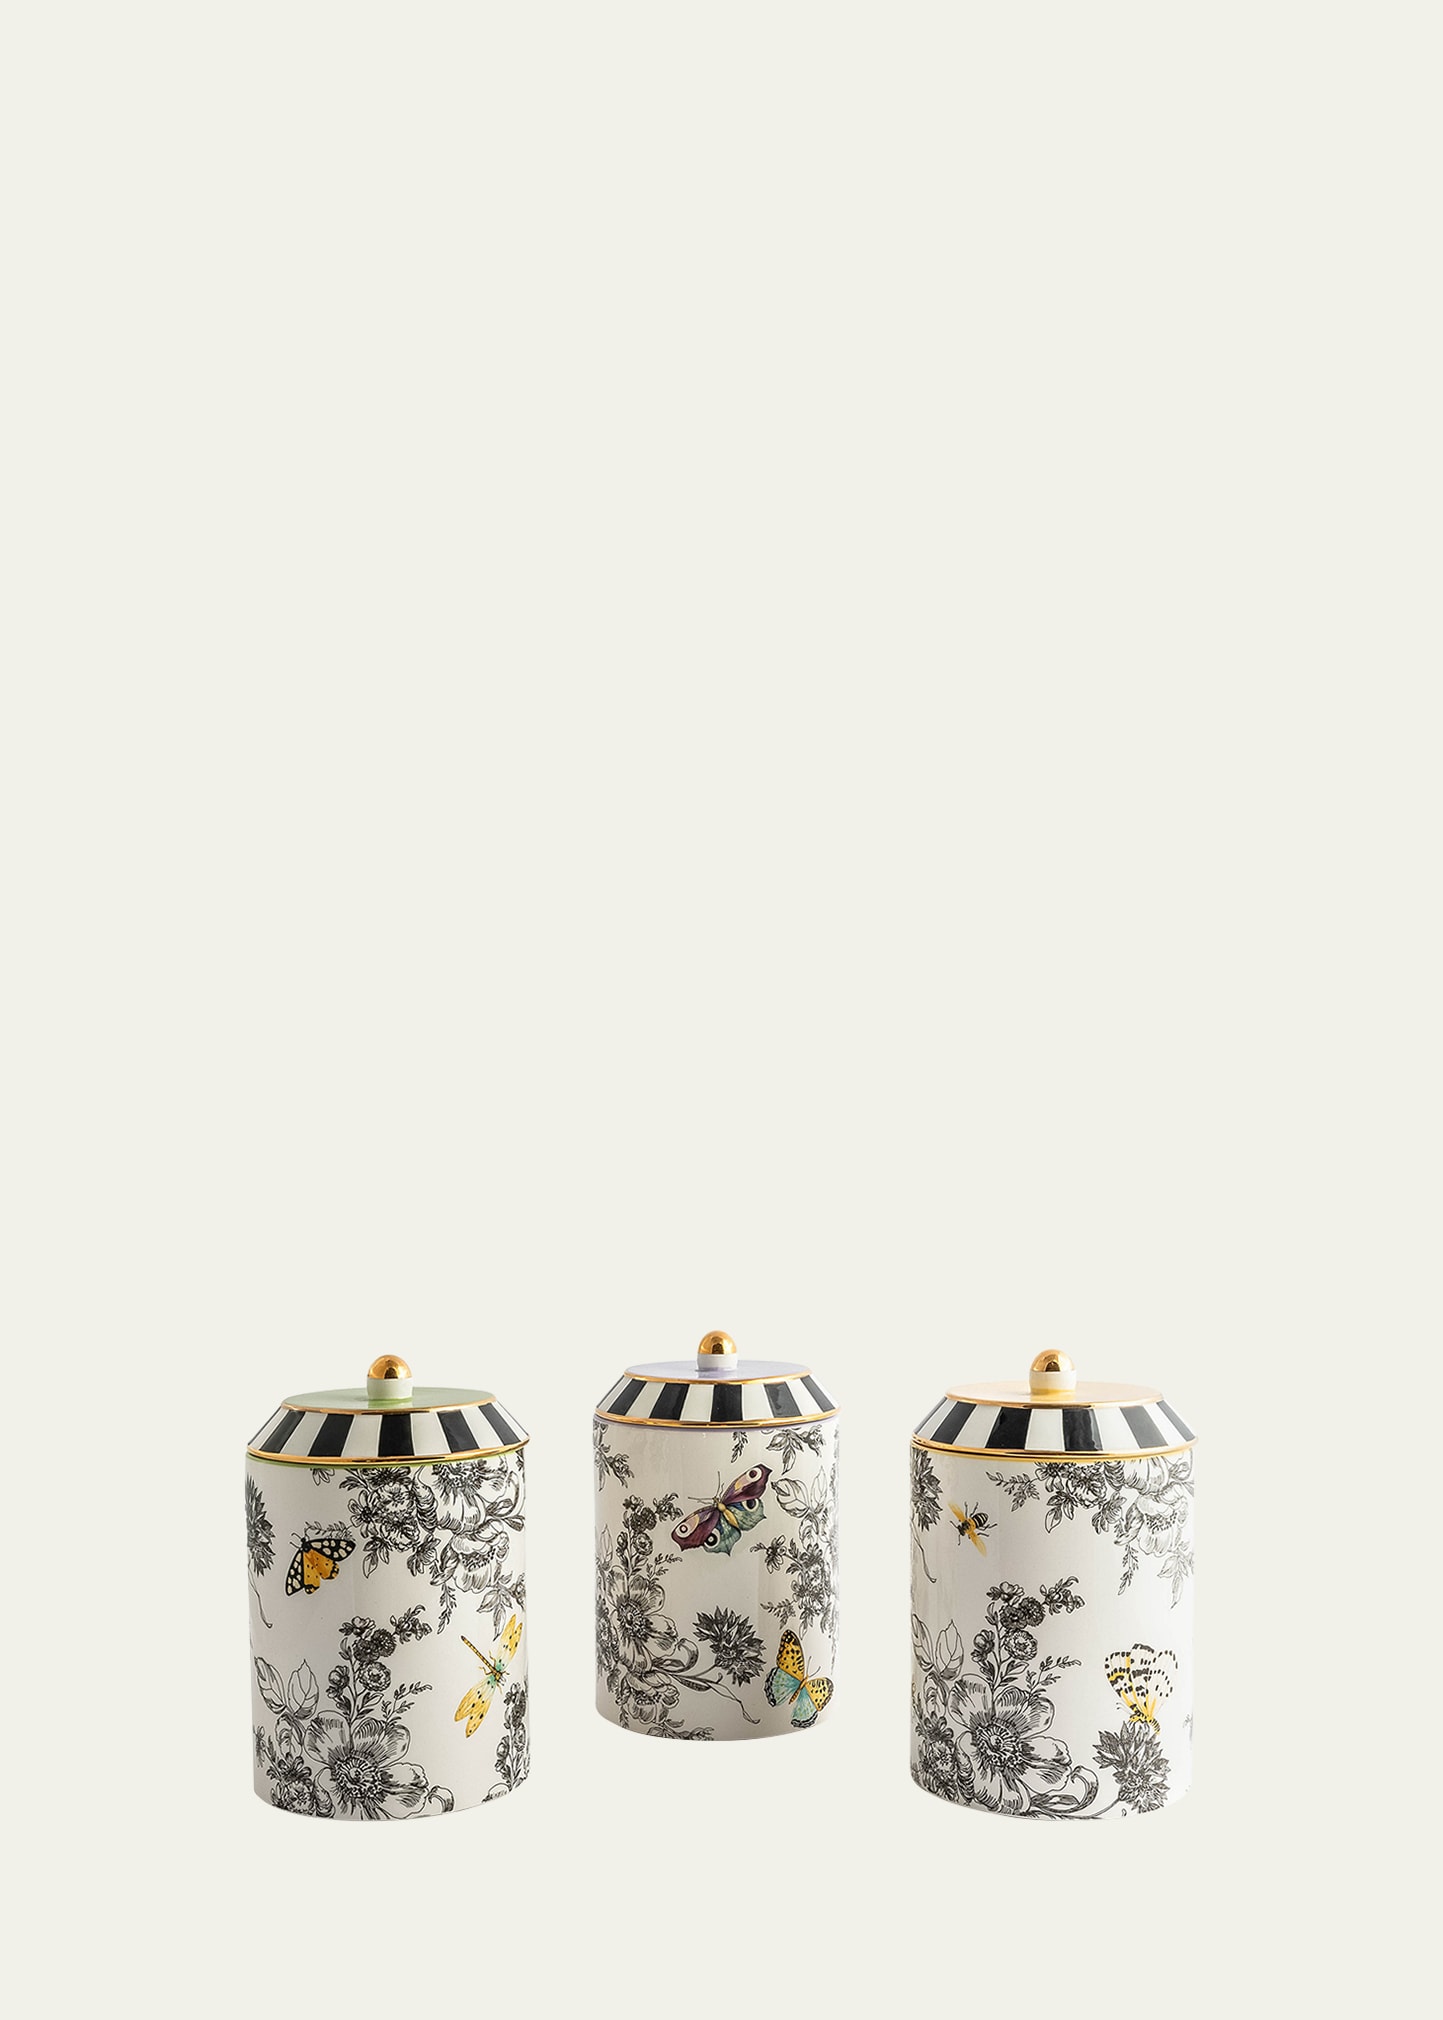 Mackenzie-childs Butterfly Toile Canisters, Set Of 3 In White